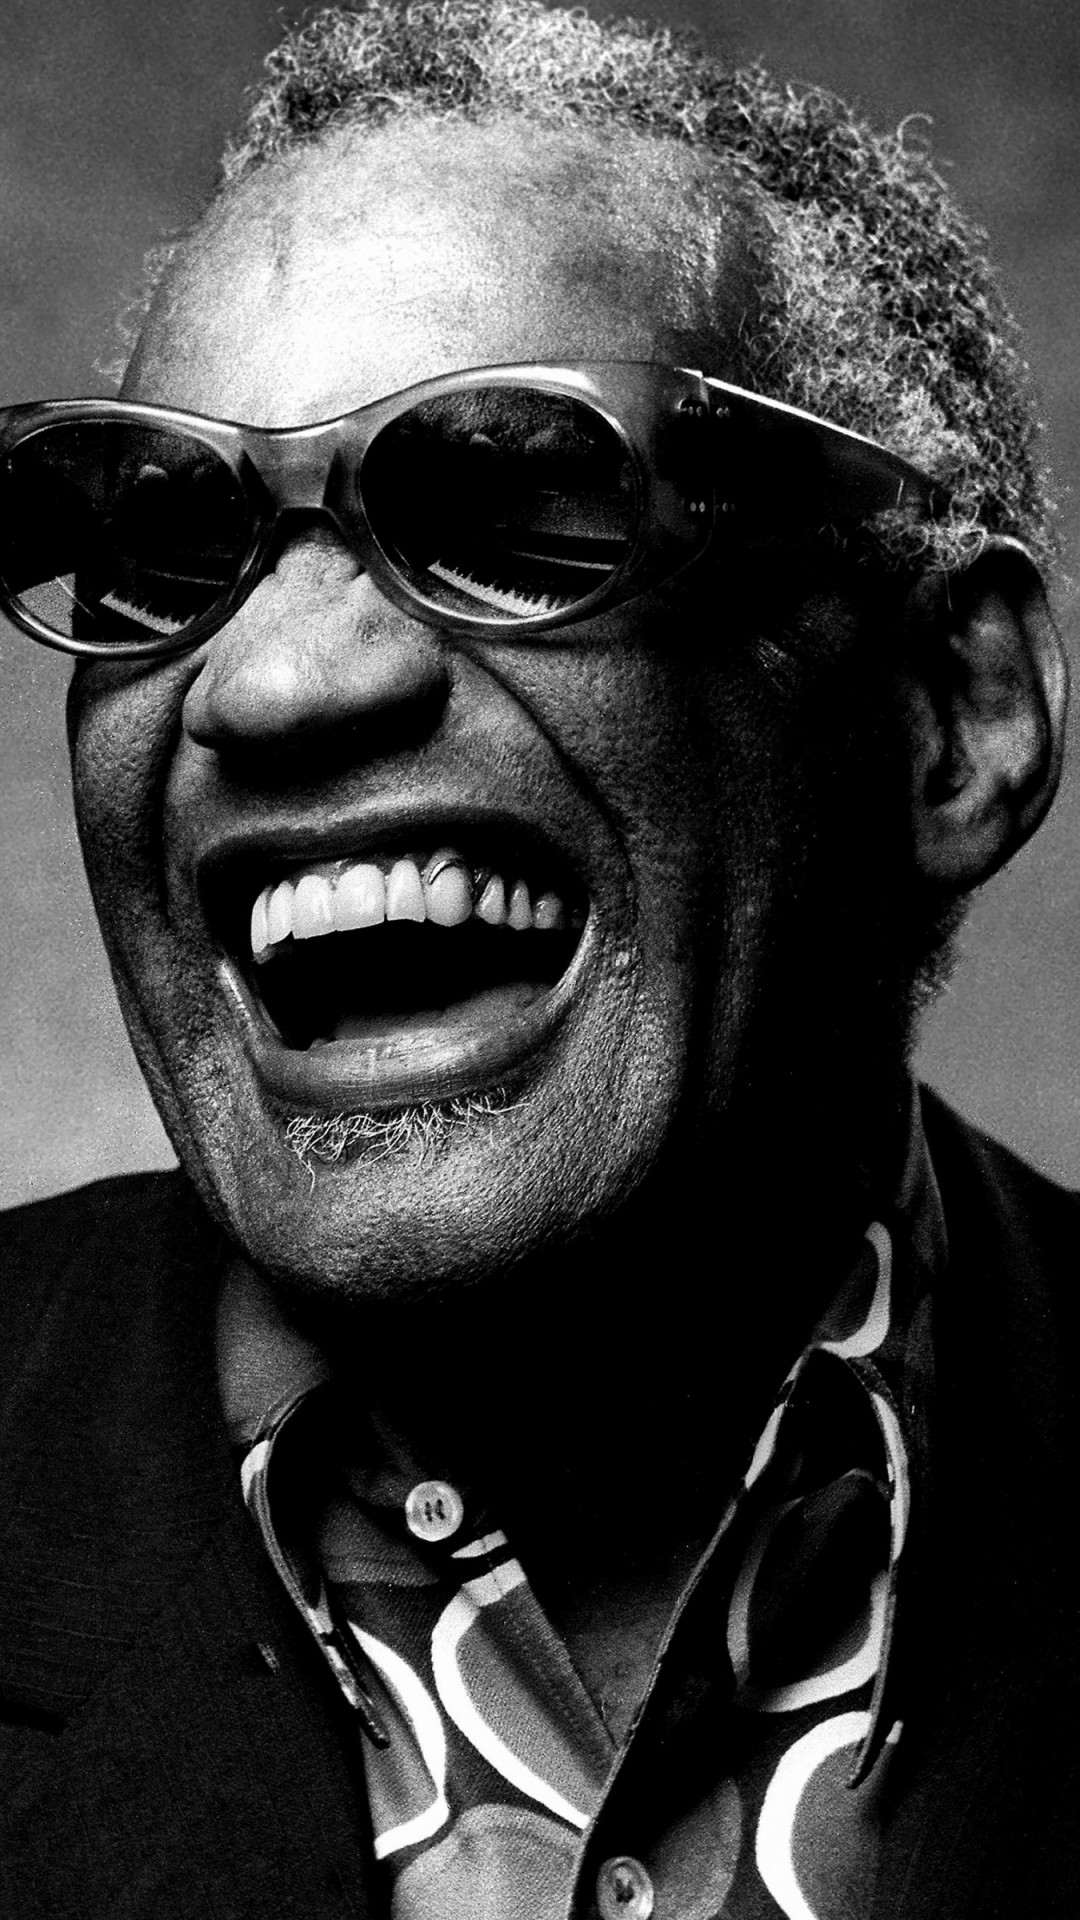 Ray Charles Portrait in Black & White Wallpaper for SAMSUNG Galaxy Note 3